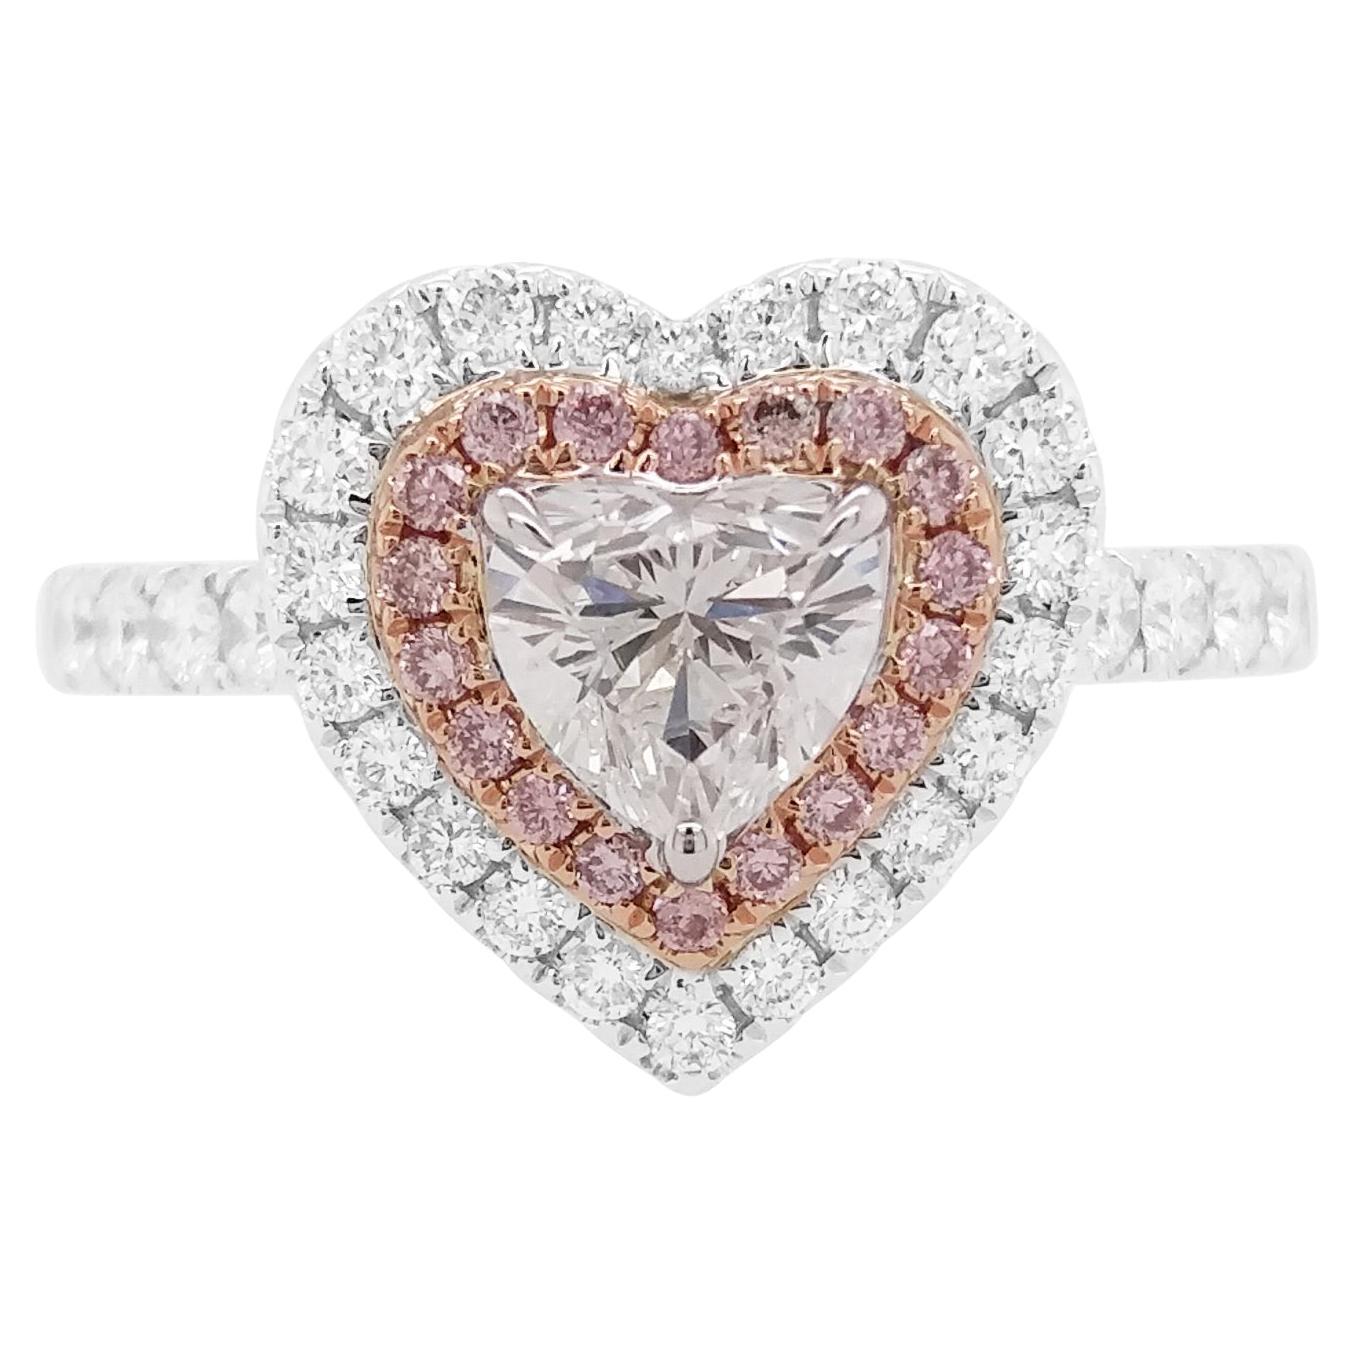 Heart Shape White and Pink Diamond Ring made in 18K Gold- Valentine Special  For Sale